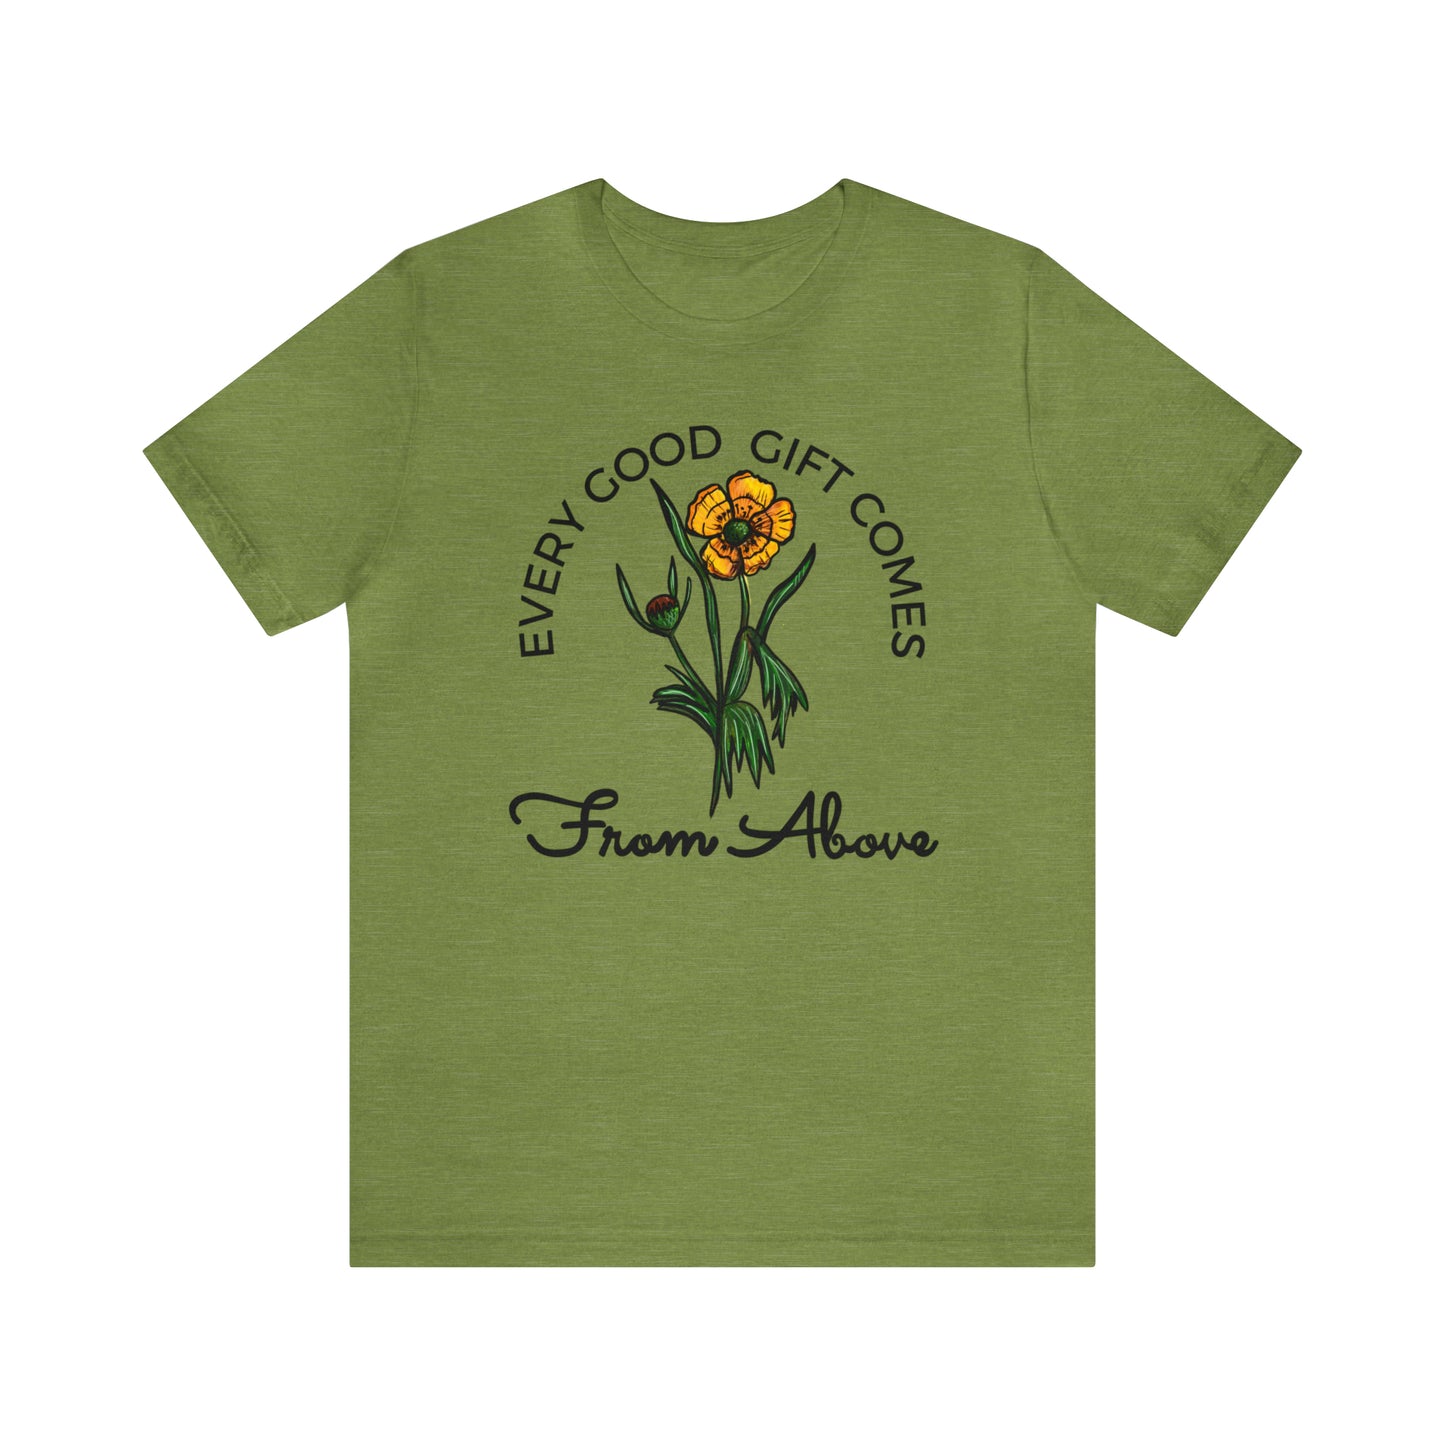 Every Good Gift Comes From Above (Green Pastures Apparel)